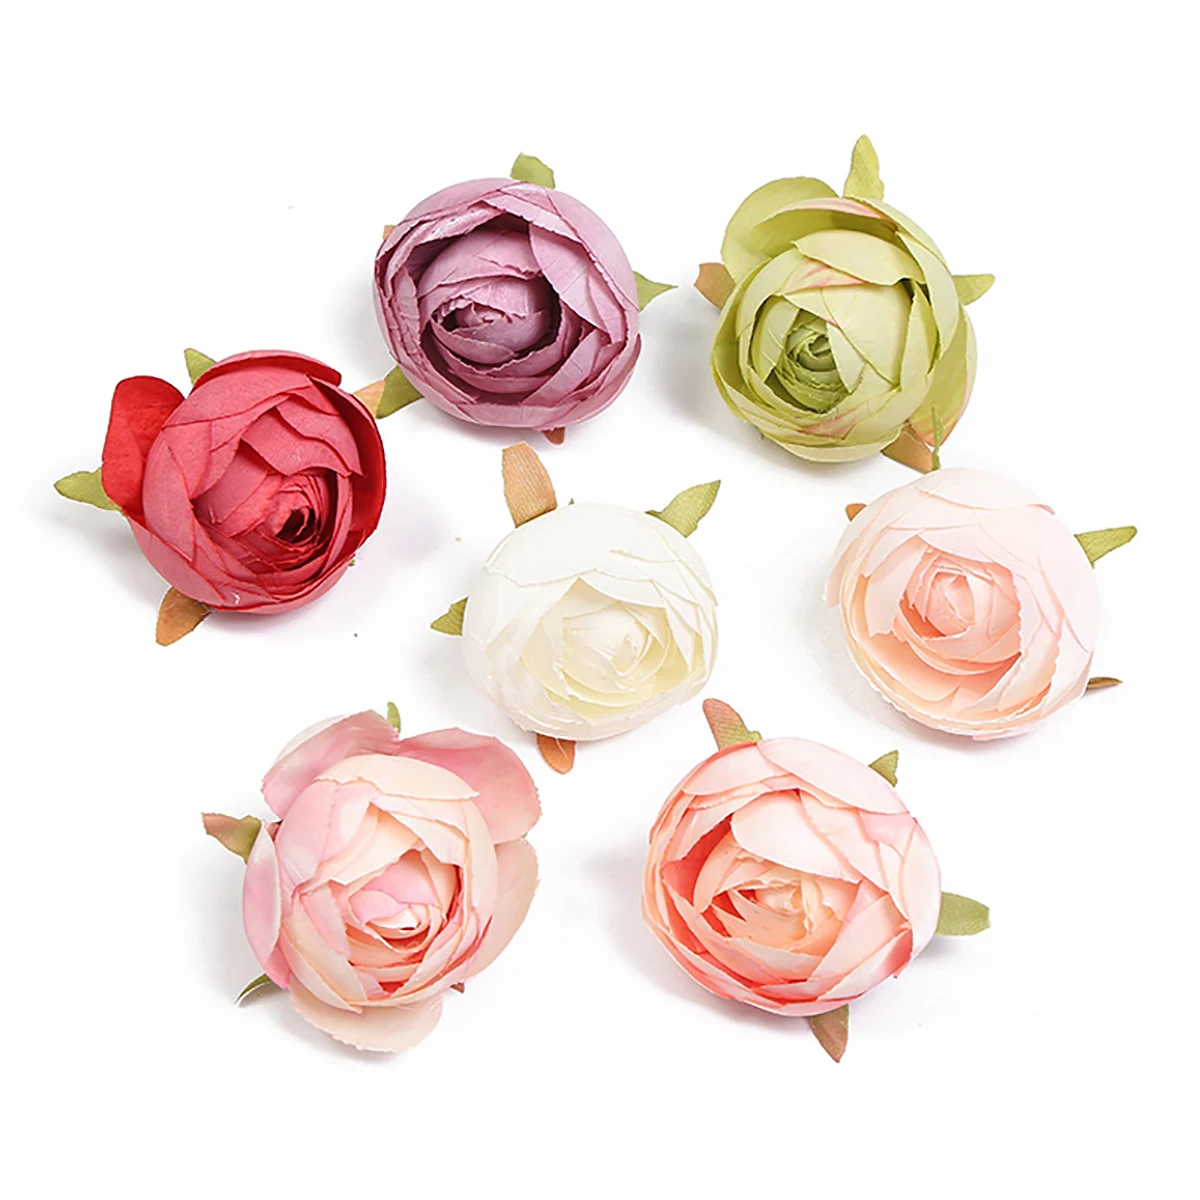 

10Pcs Mini Camellia Bud Bouquet Silk Artificial Flower Wedding Favor Box Rose Fake For DIY Christmas New Year Party Scrapbooking